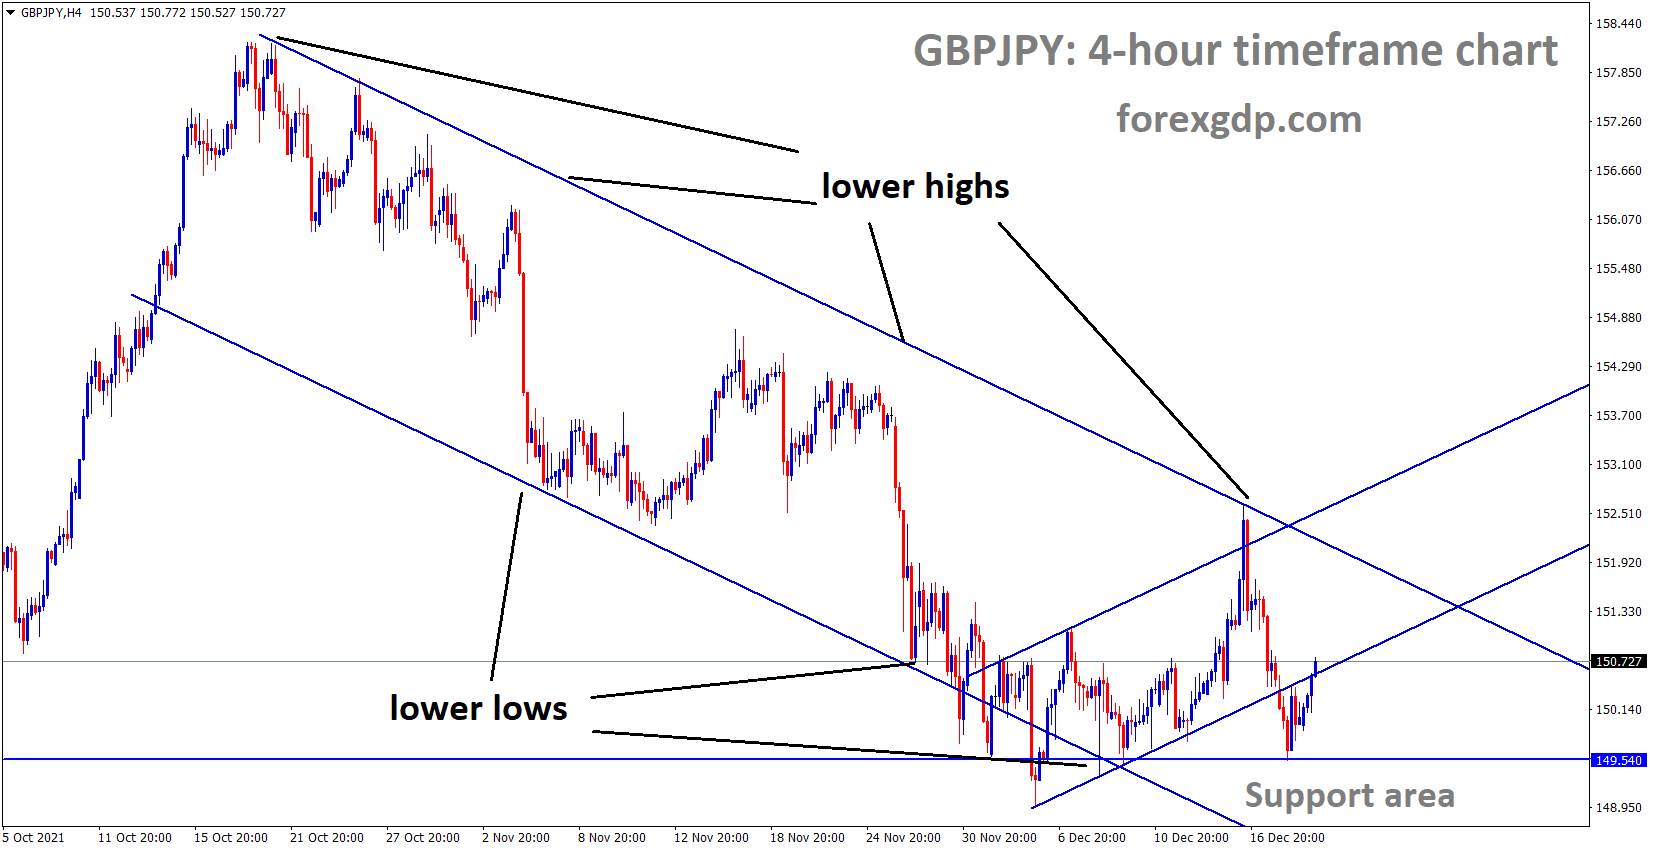 GBPJPY is moving in the Descending channel and the market rebounded from the Horizontal support area of the channel